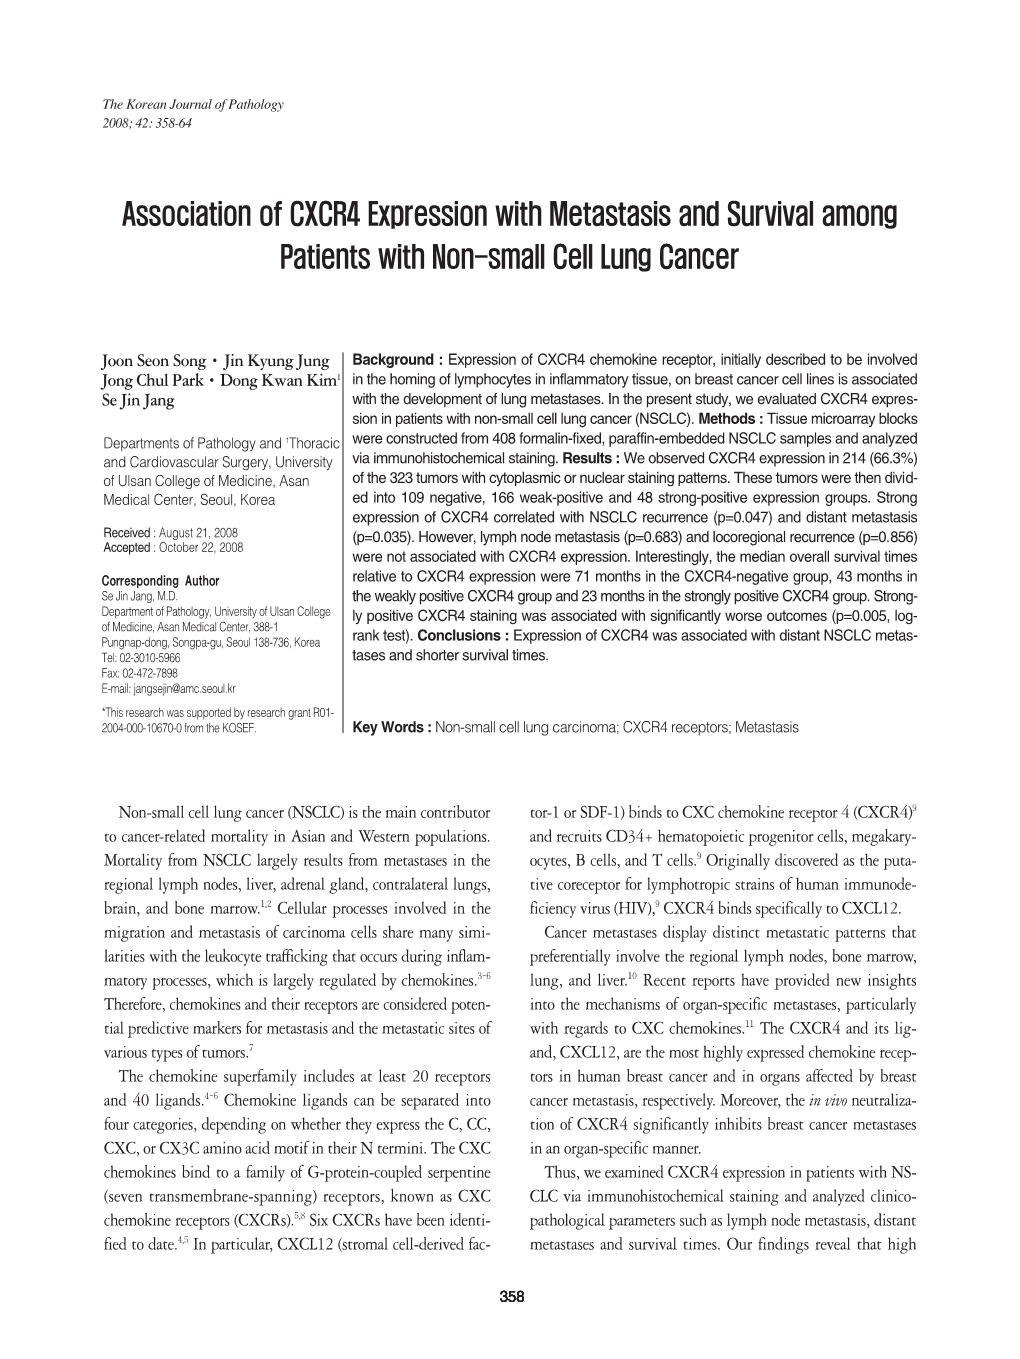 Association of CXCR4 Expression with Metastasis and Survival Among Patients with Non-Small Cell Lung Cancer